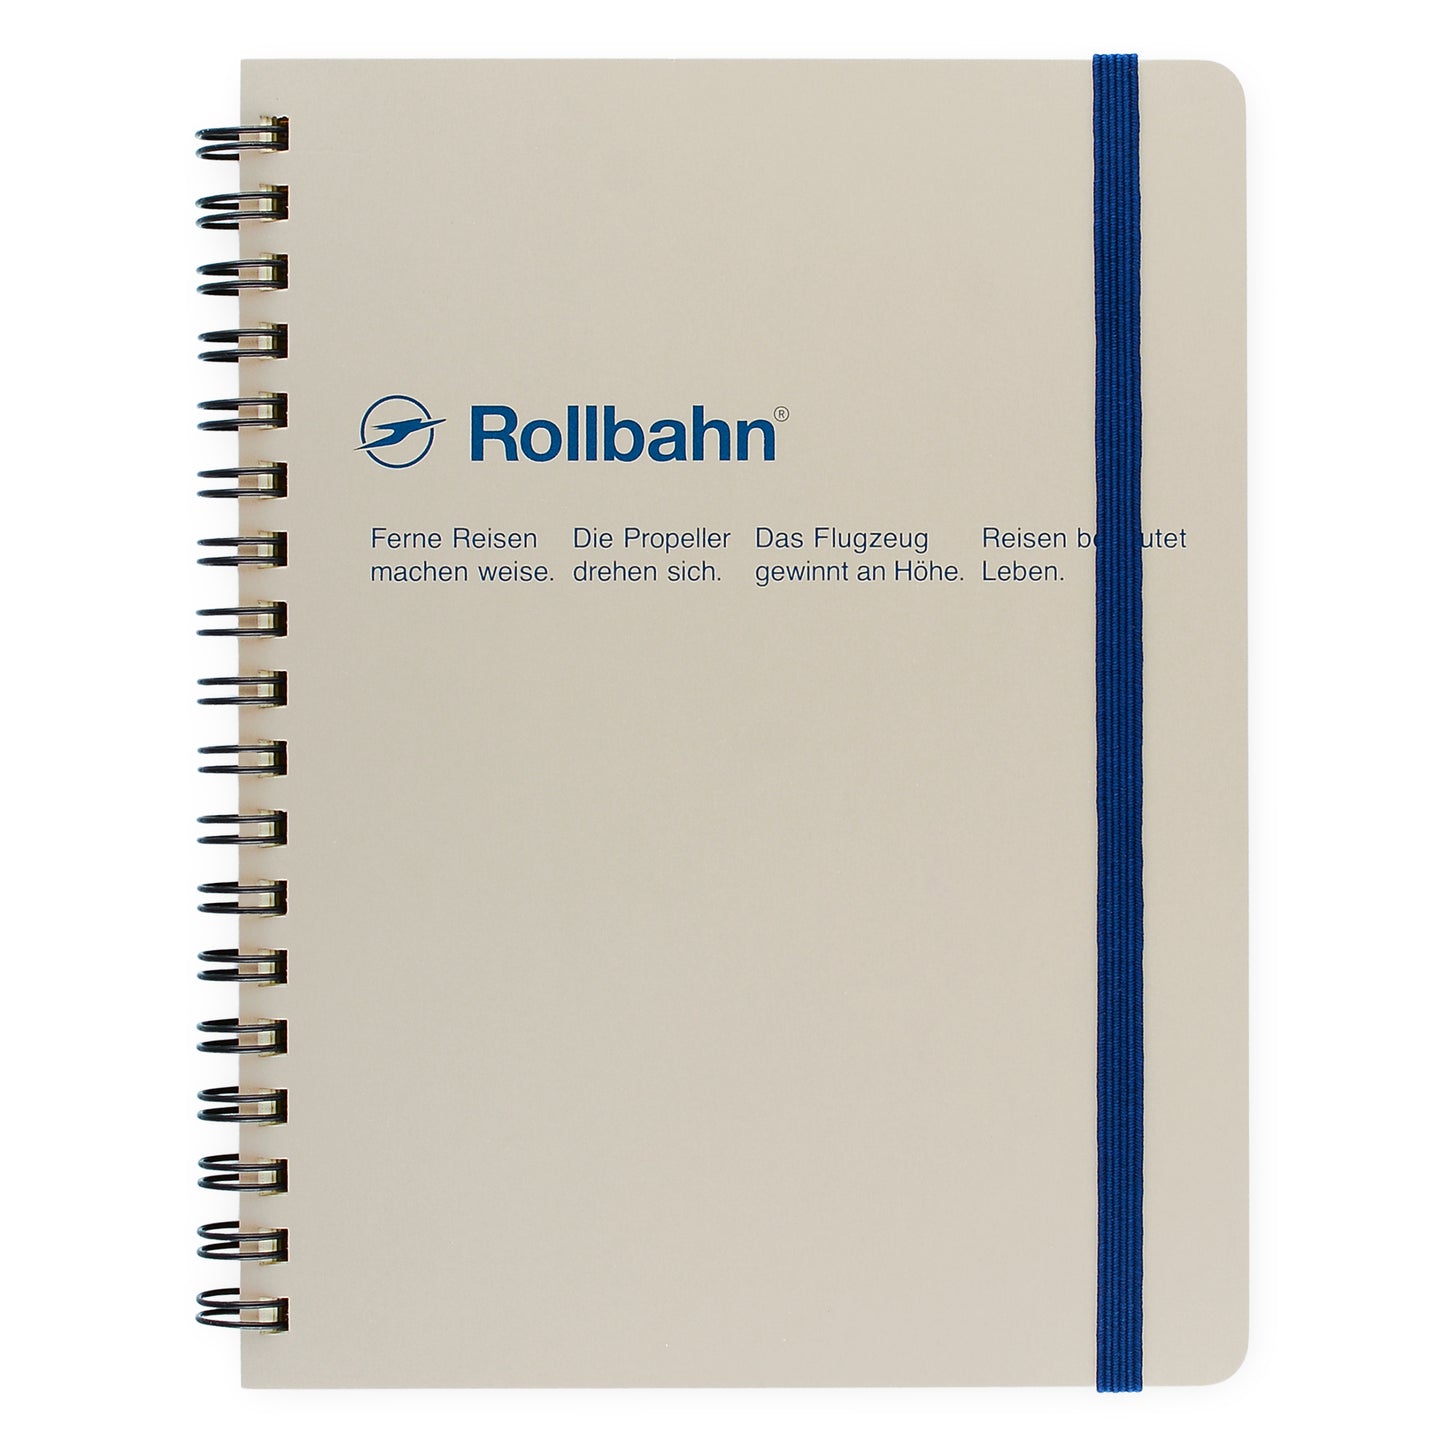 Delfonics Rollbahn Notebook Small, Large Or A5 | 9 Colors Greige / Small (4.5 x 5.5")